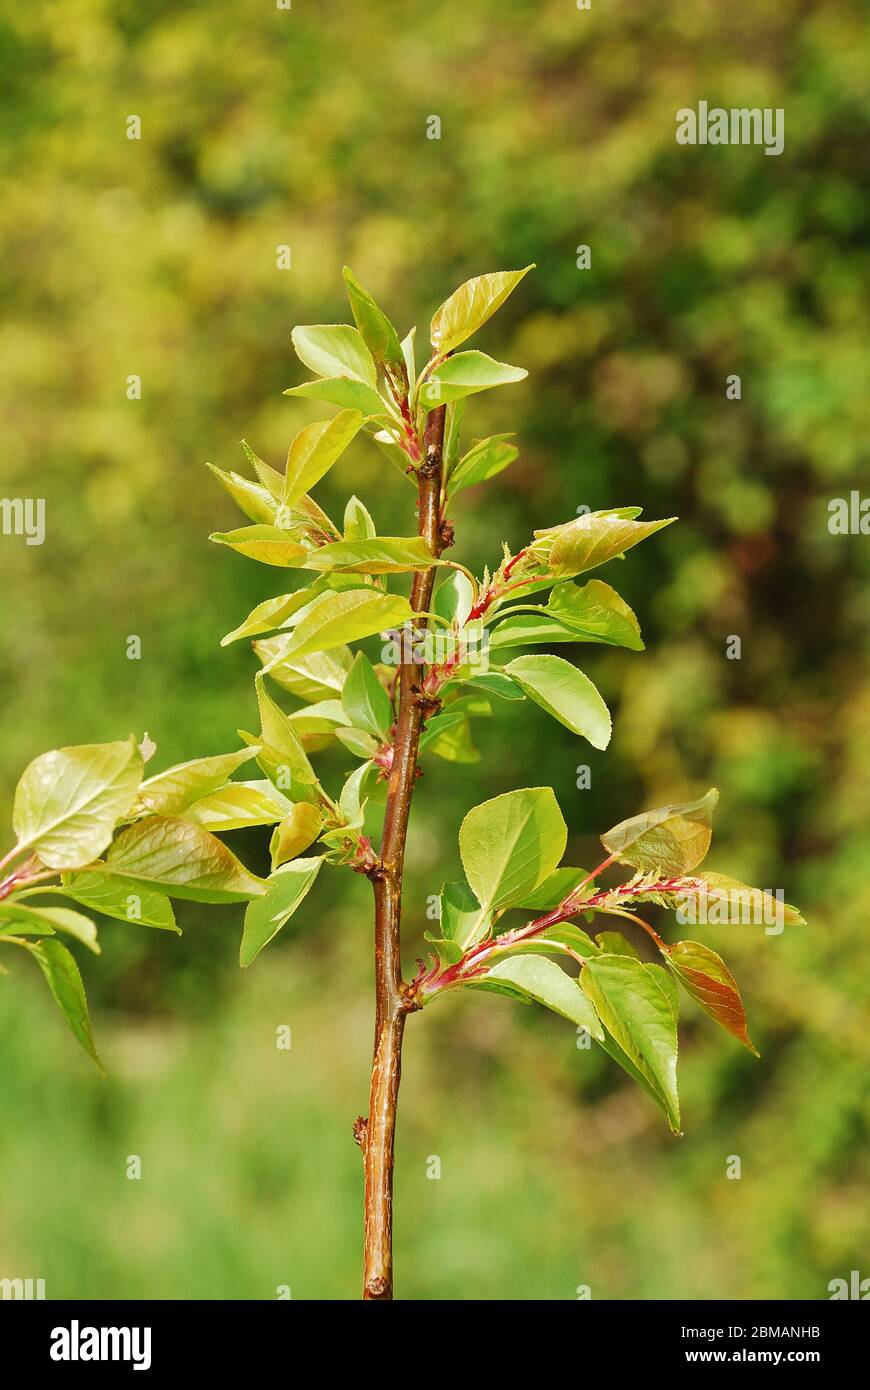 The Young Leaves Growing On An Apricot Tree Variety Tyrinthos In Spring Mid April Stock Photo Alamy